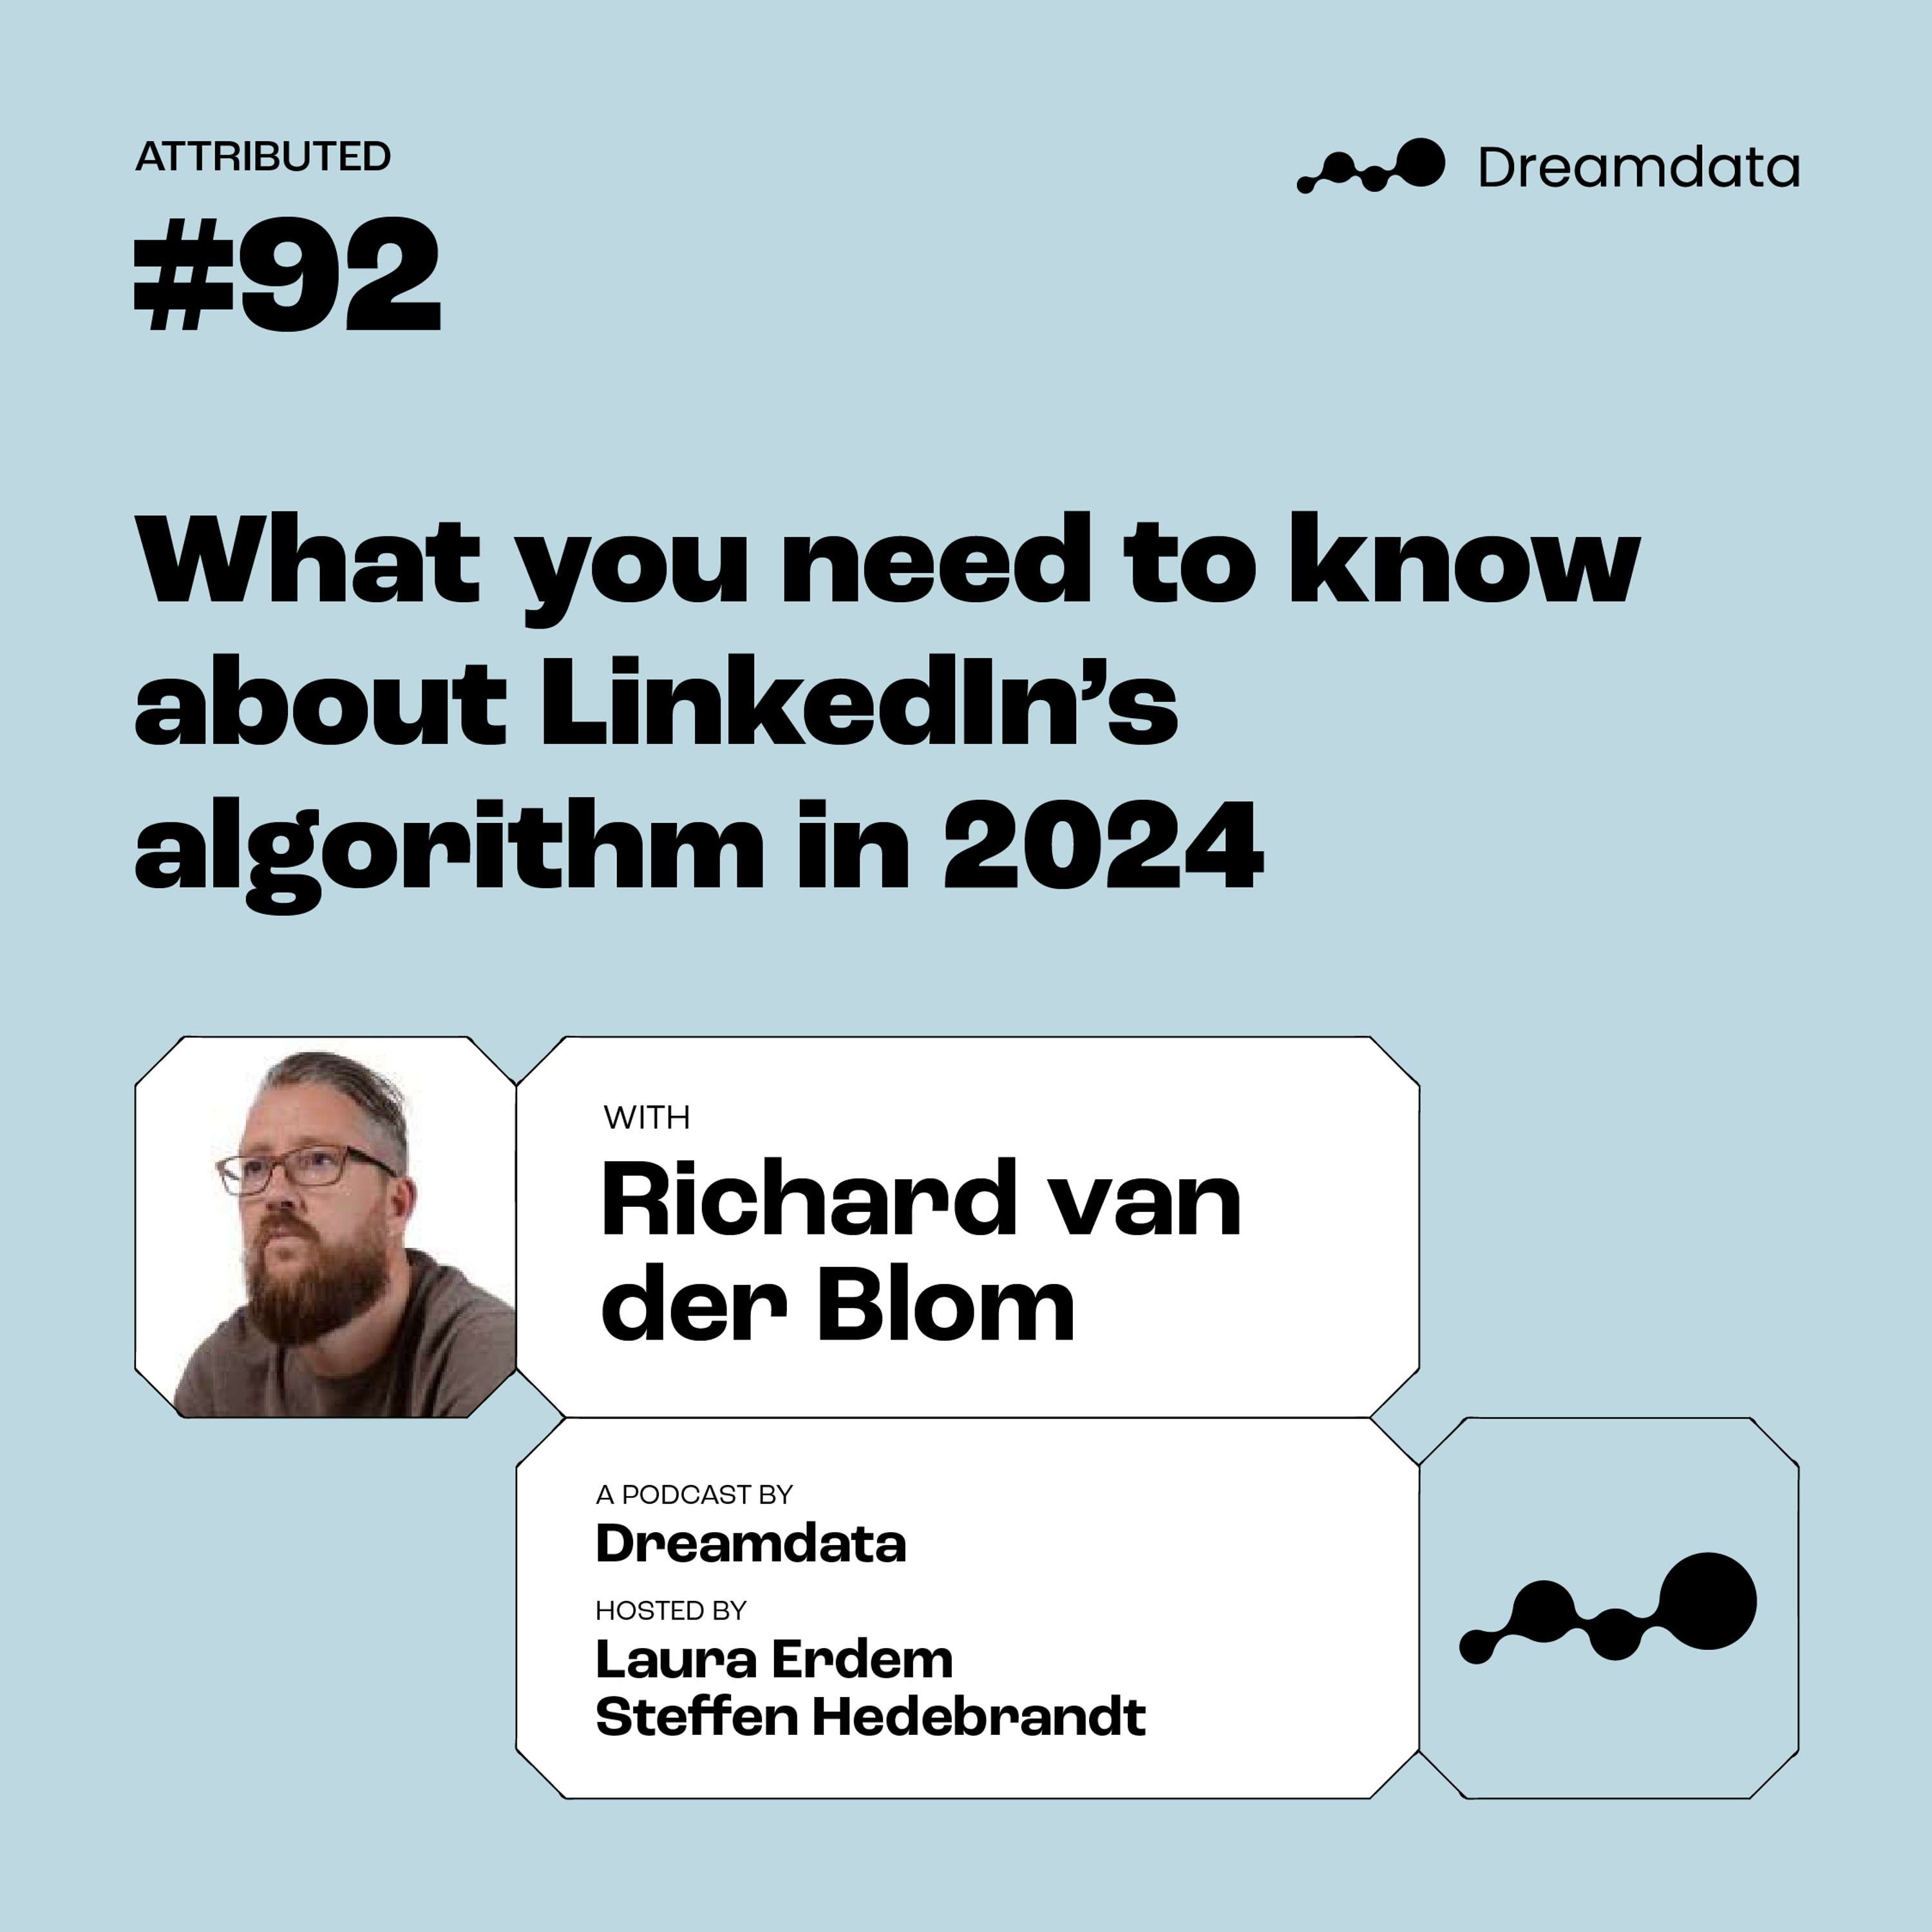 Richard van der Blom: What you need to know about the LinkedIn Algorithm in 2024